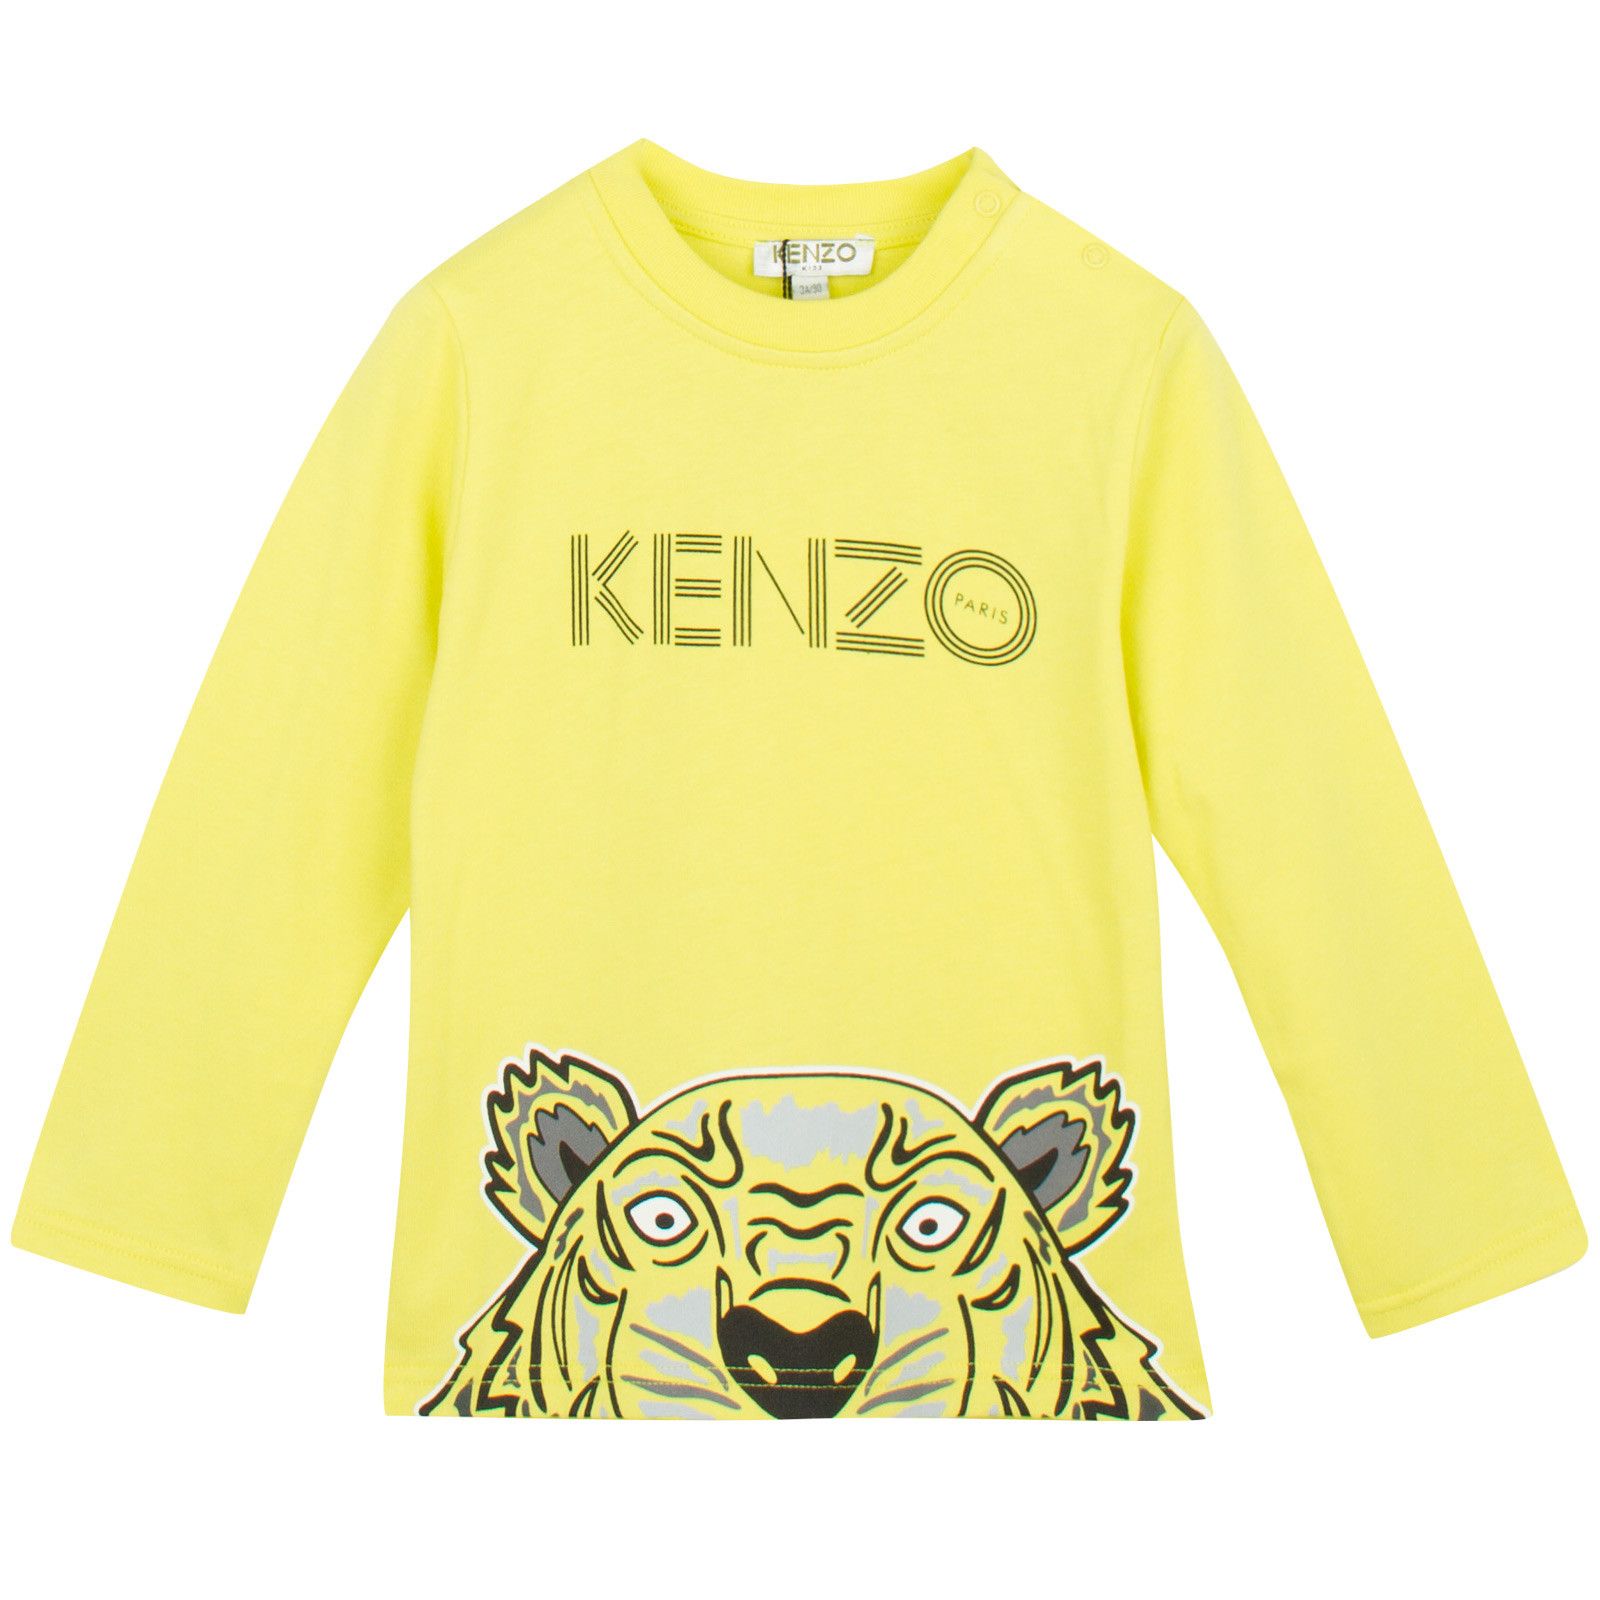 Baby Lime Green Cotton Jersey T-Shirt With Peeking Tiger - CÉMAROSE | Children's Fashion Store - 1